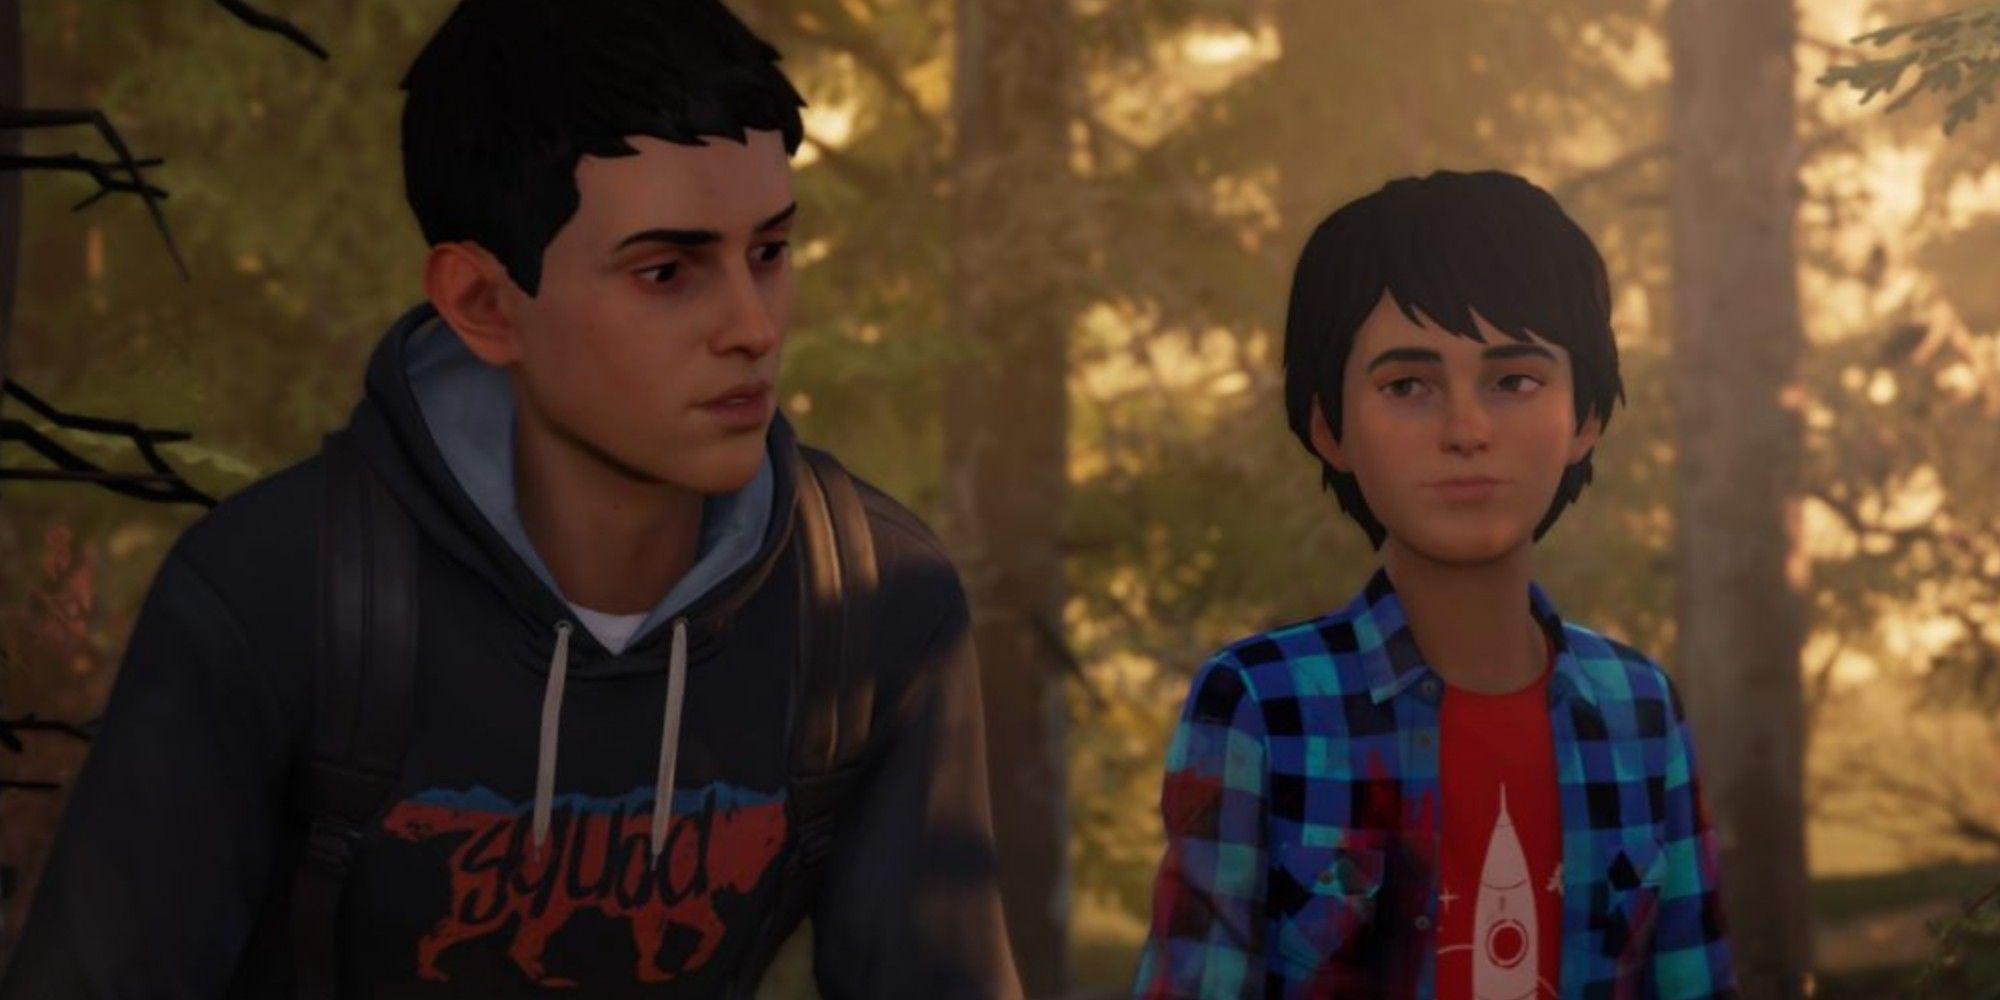 download life is strange 2 game for free